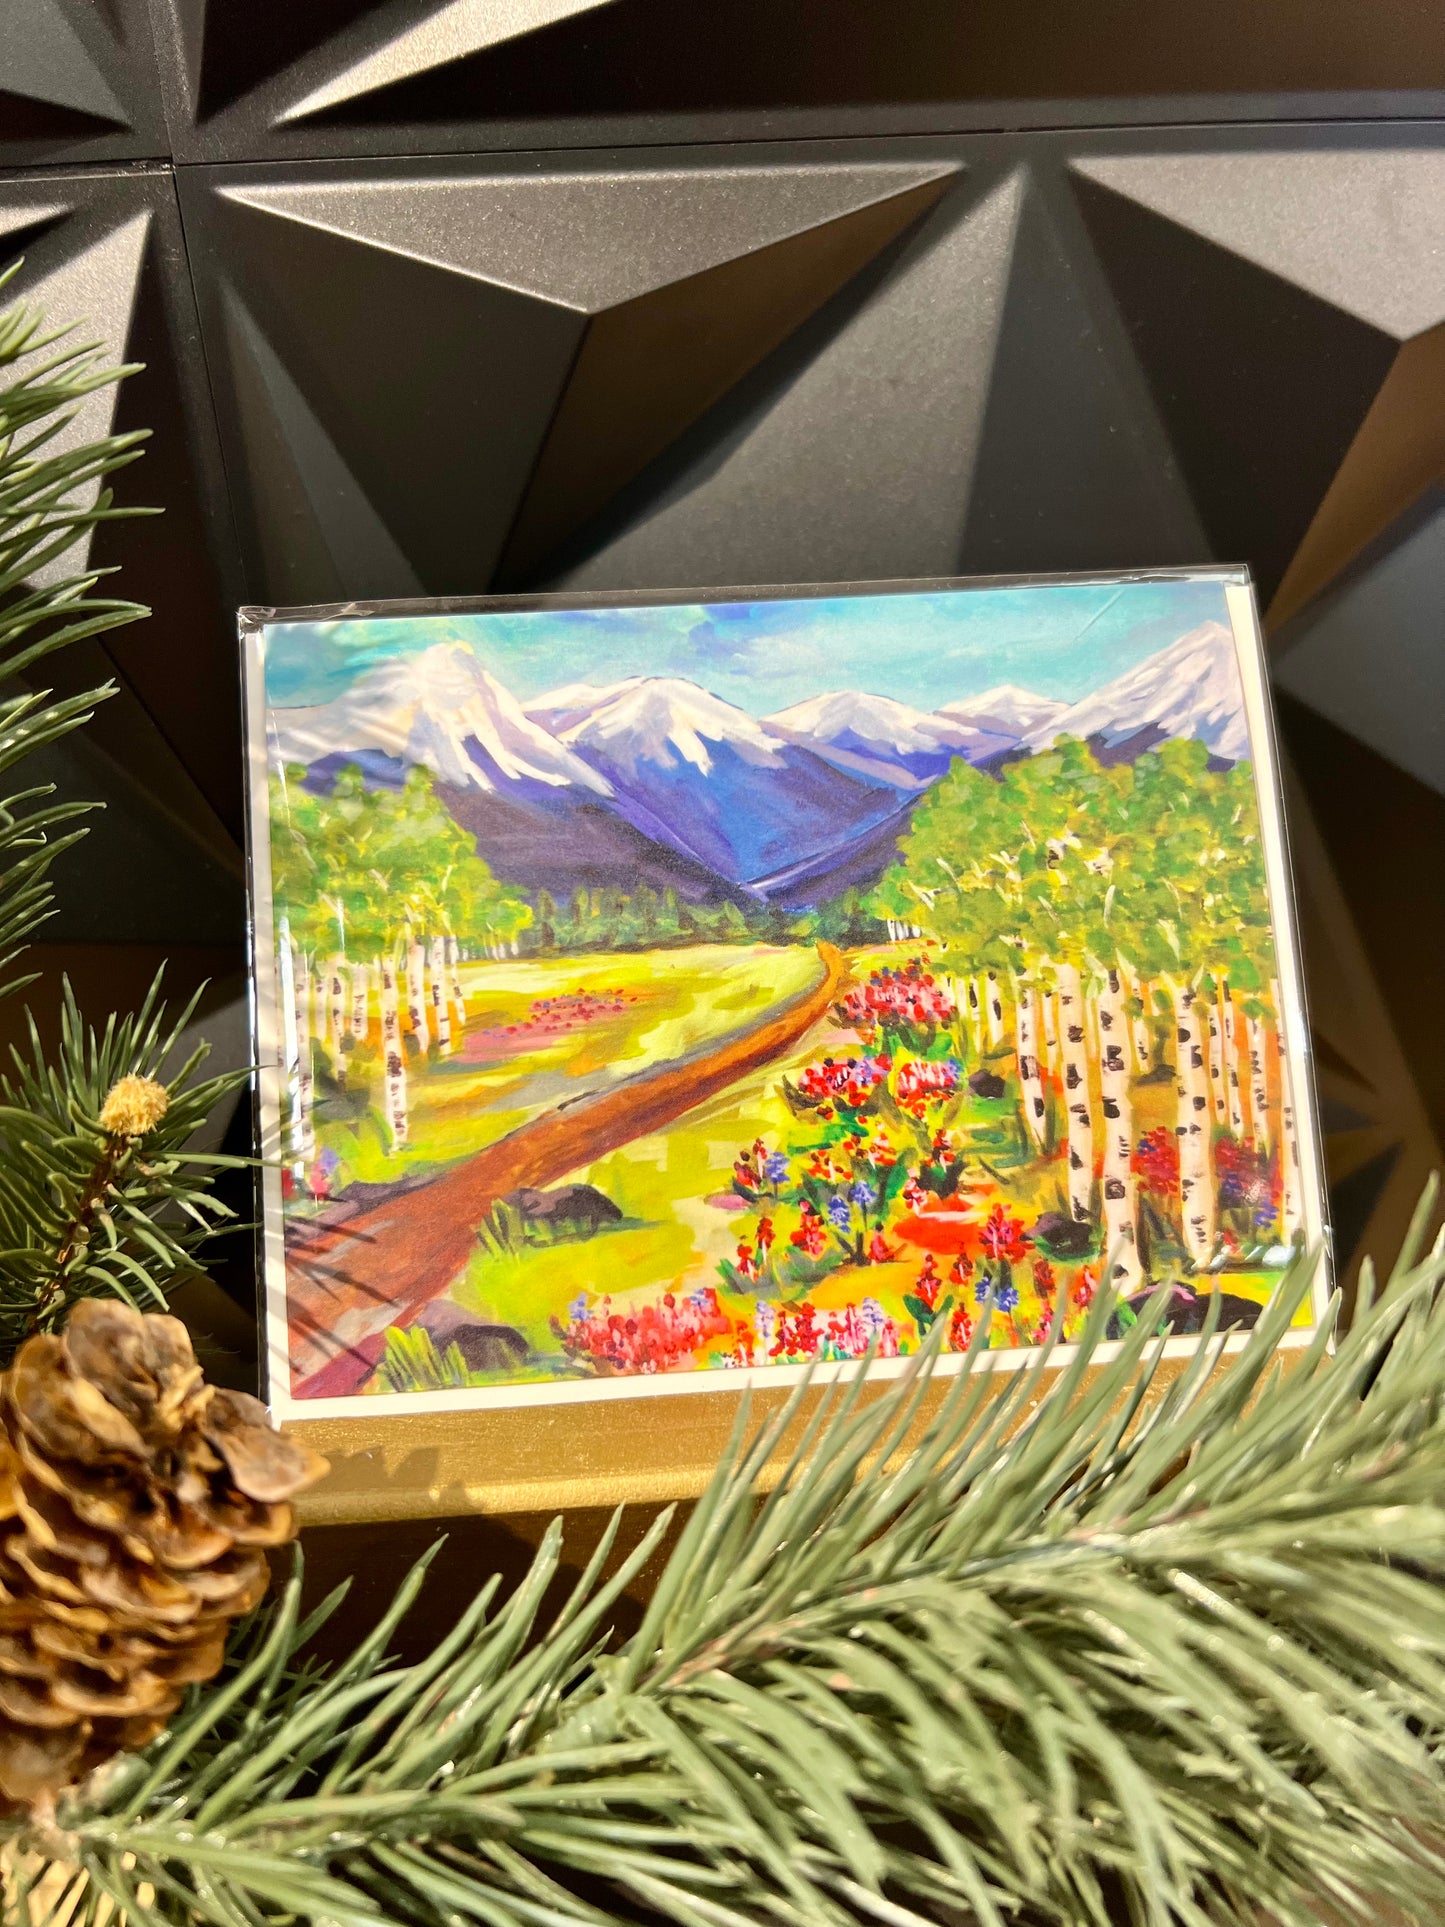 rocky mountain landsacape greeting card next to a pine branch on table